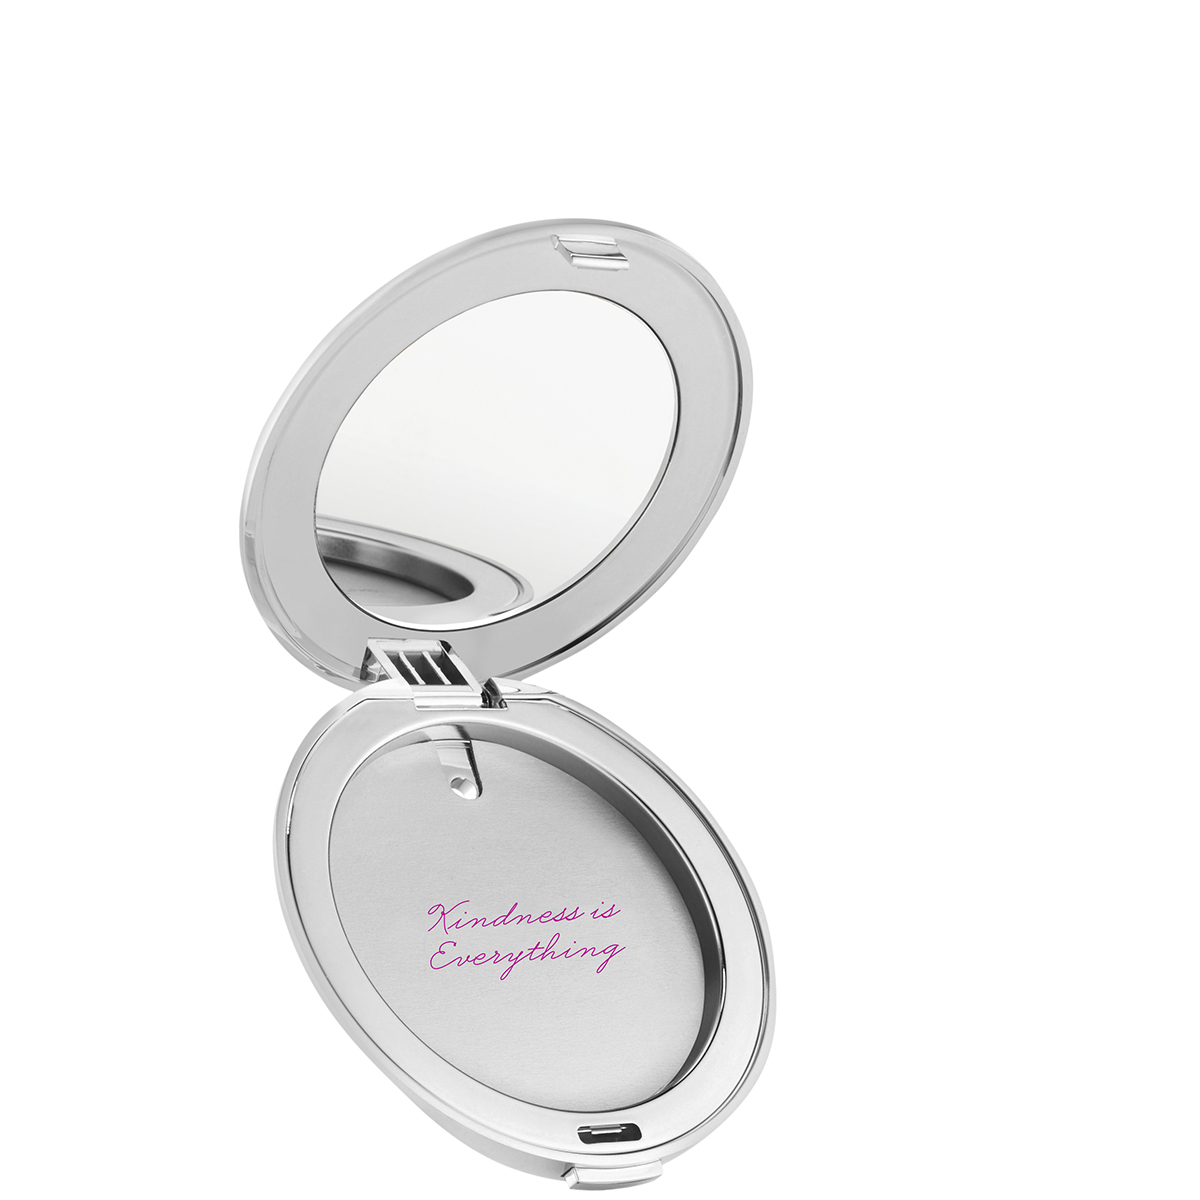 Jane Iredale Compact Refillable Silver